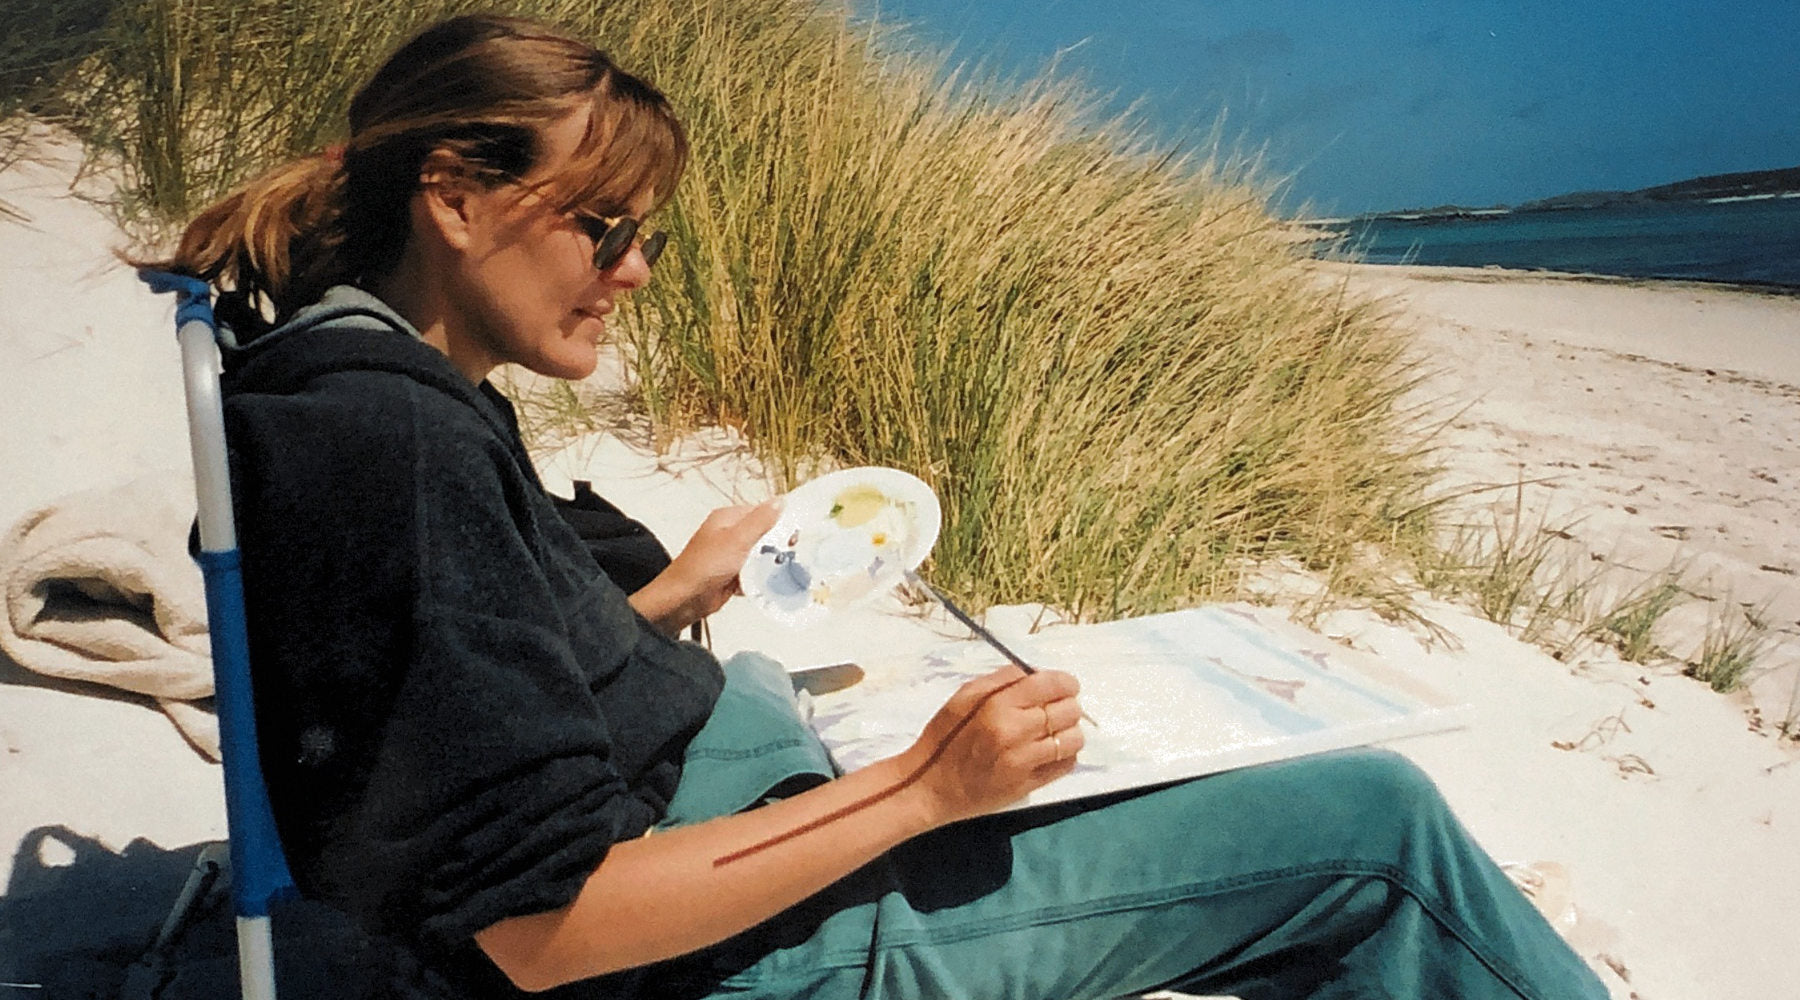 Cornwall artist Joanne Short painting on the beach at Tresco, Isles of Scilly